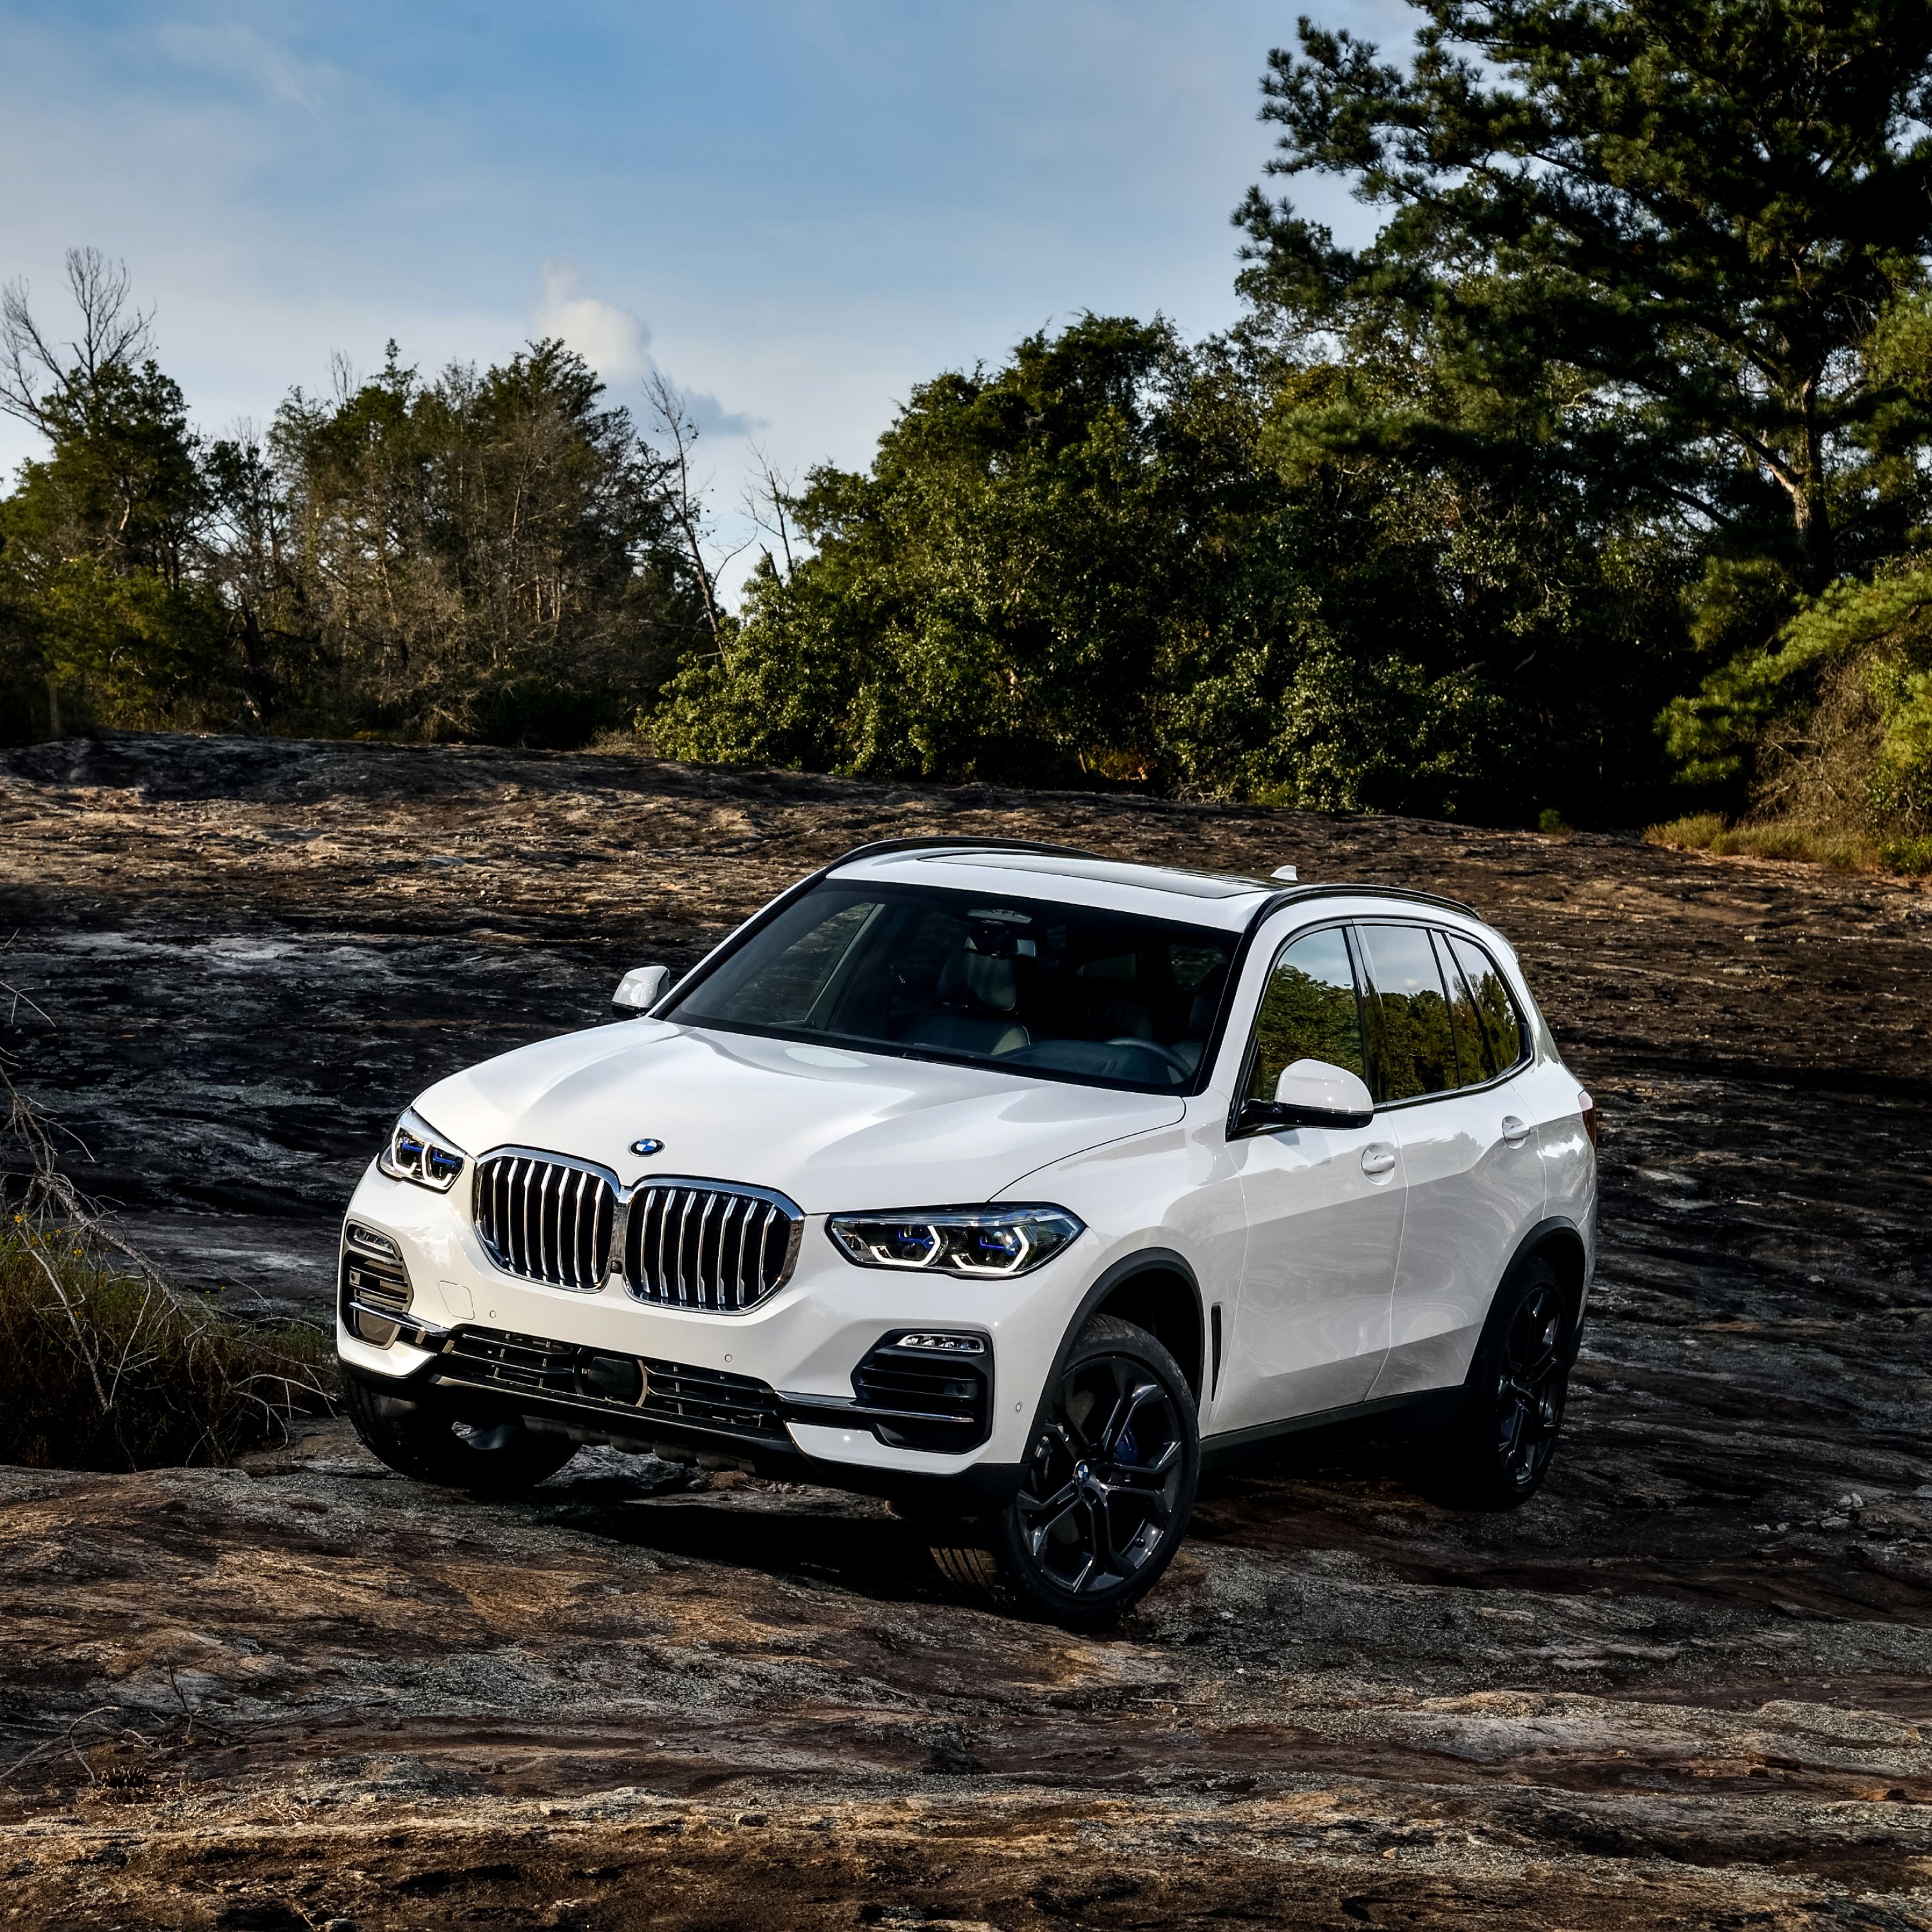 BMW X5 G05 SUV in a clearing with muddy ground in rough terrain with trees and bushes in the background